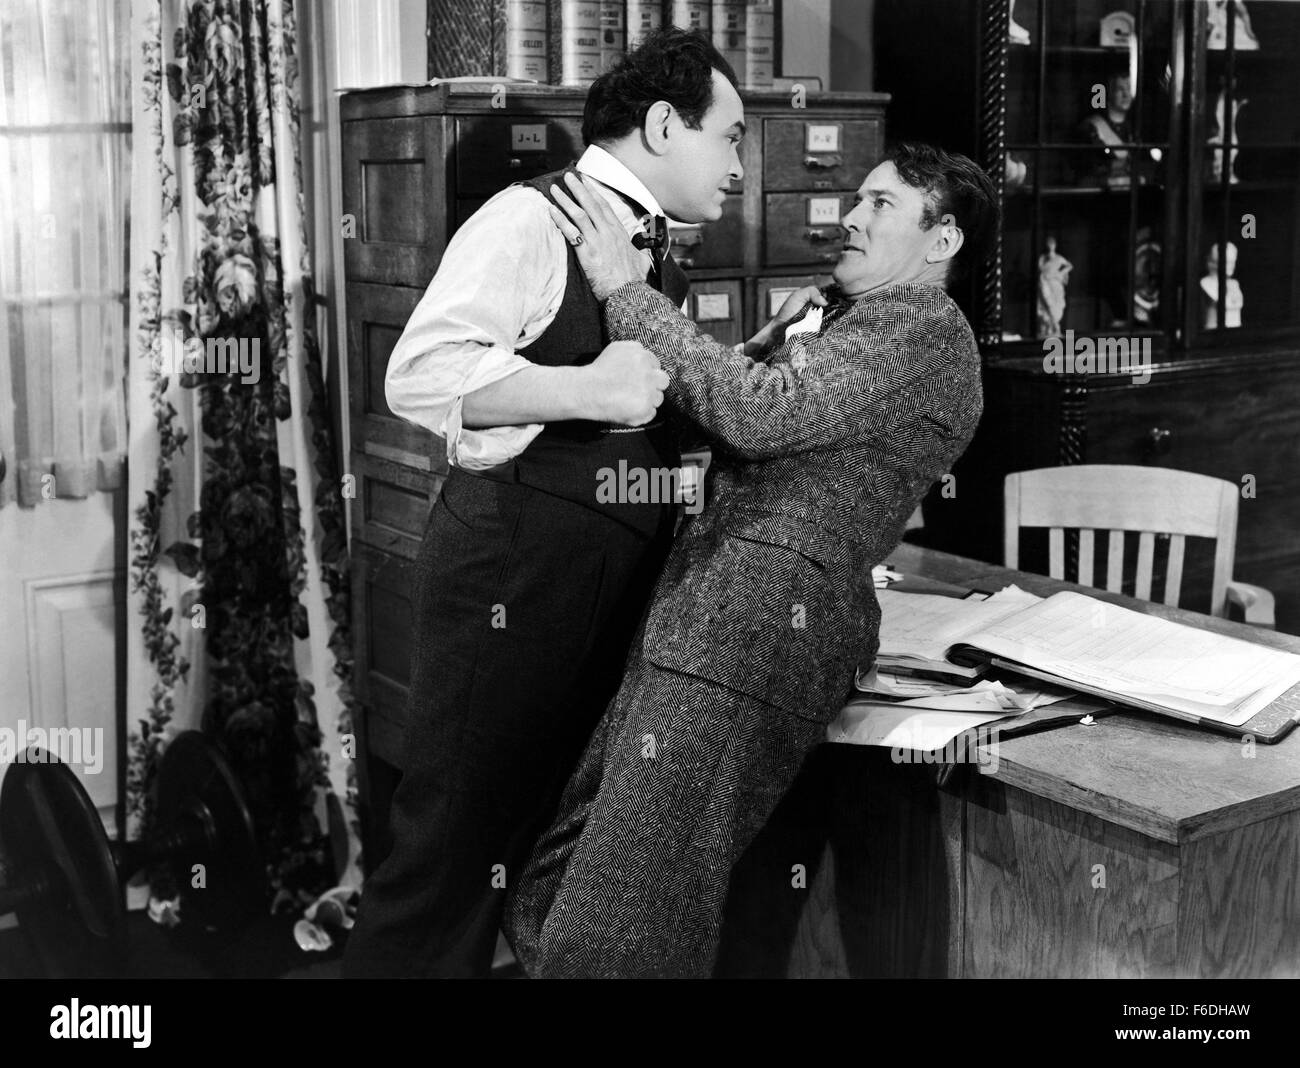 RELEASED: Aug 25, 1938 - Original Film Title: PICTURED: EDWARD G. ROBINSON. Stock Photo